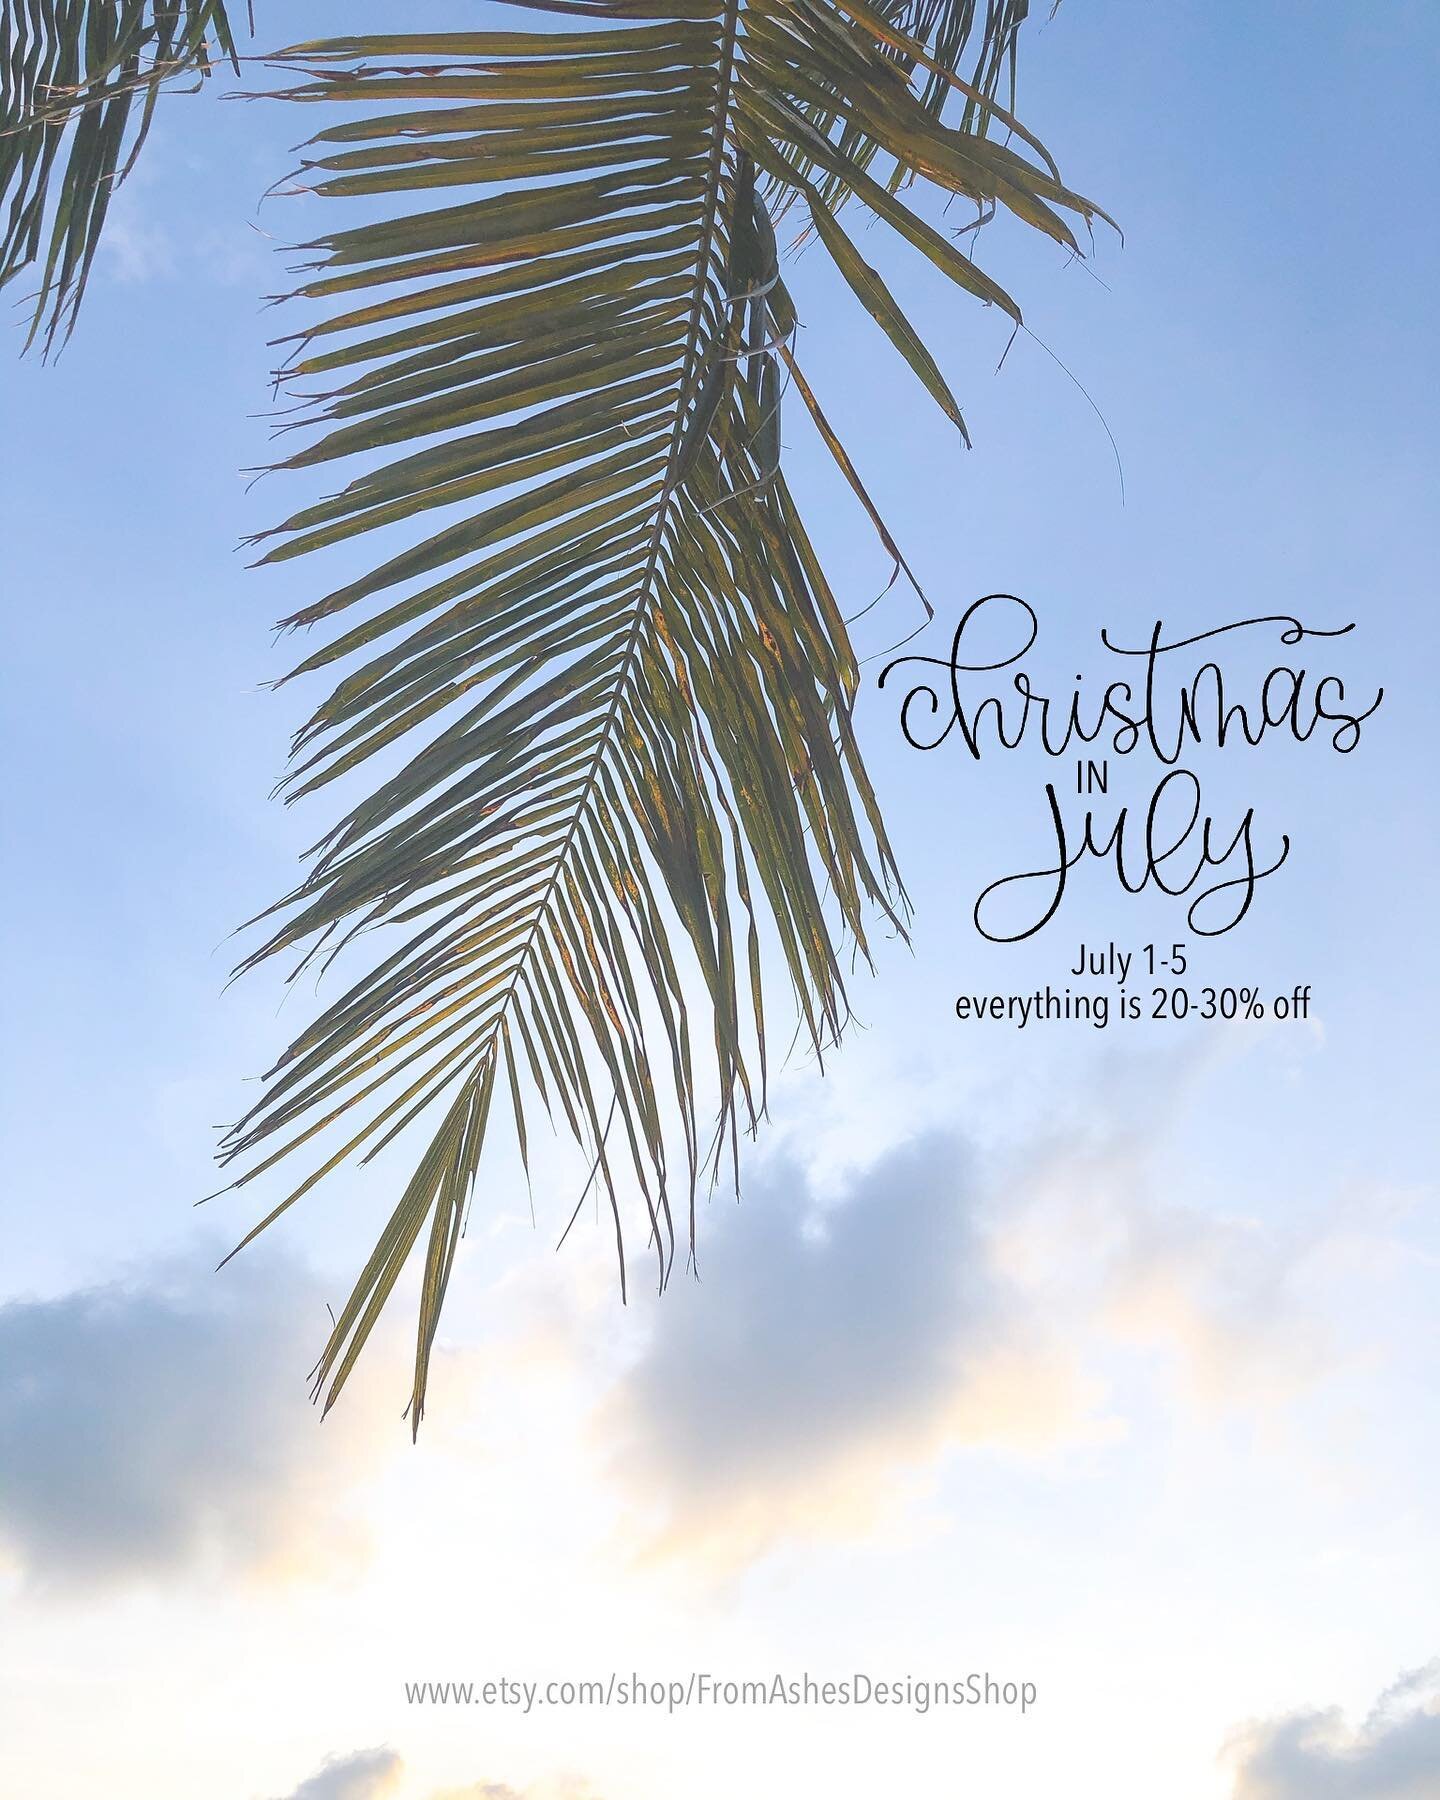 Christmas in July!
Everything is on sale until the 5th. Free shipping on orders over $35. Fluid ornaments will be LIVE at 10am EST. 

(This pic was taken in The Keys last year)